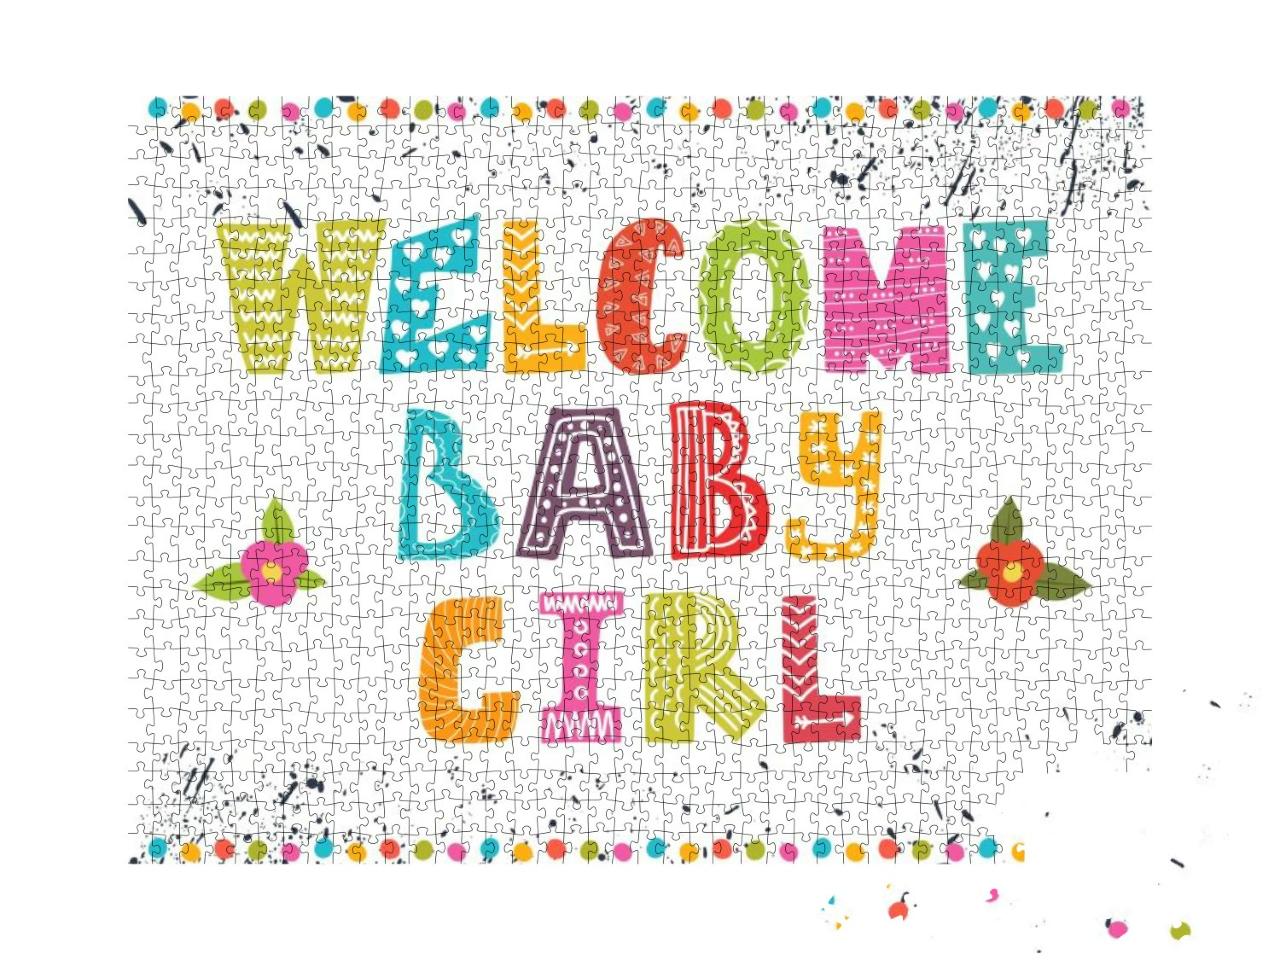 Welcome Baby Girl. Baby Girl Arrival Postcard. Bab... Jigsaw Puzzle with 1000 pieces